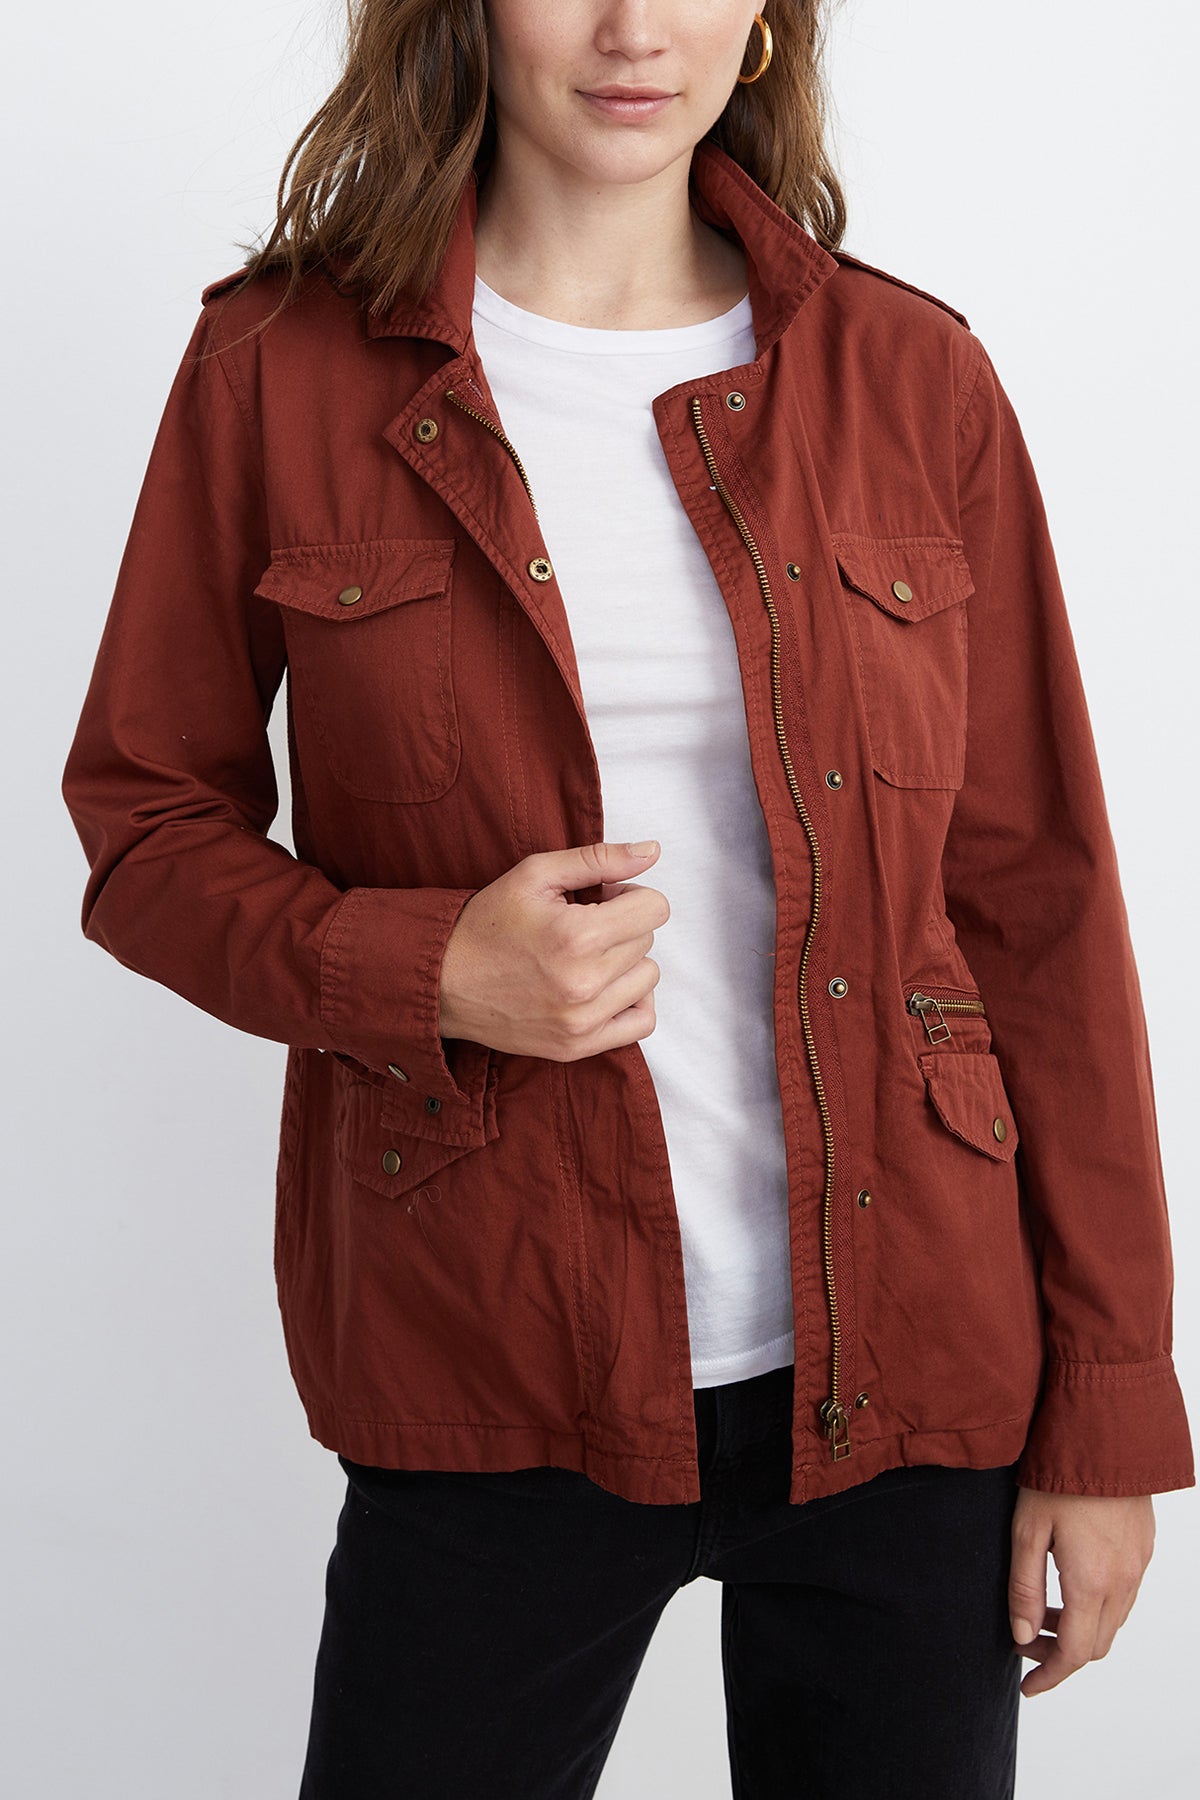 ruby jacket rust front-24285339156673